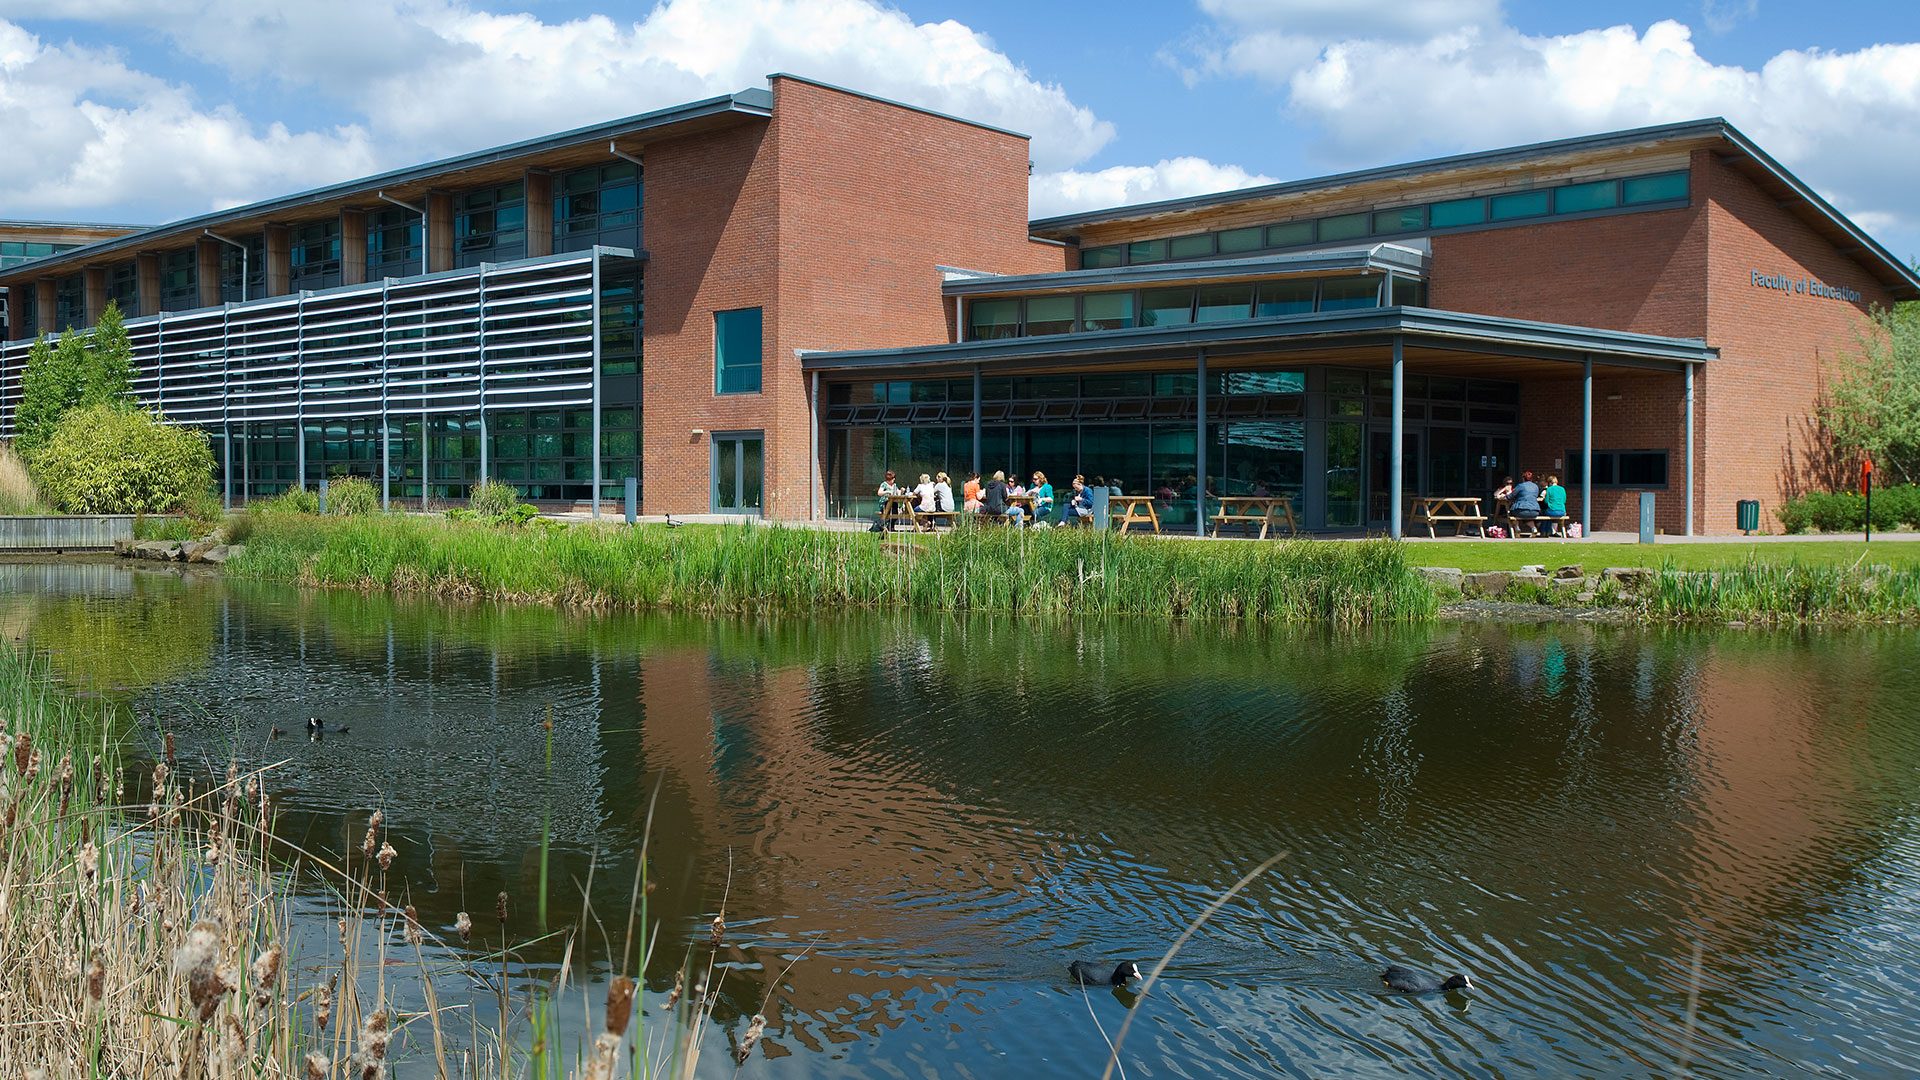 The lake in the foreground with the Faculty of Education building in the background. Ducks swim on the lake, and people sit outside the Faculty of Education on picnic benches.